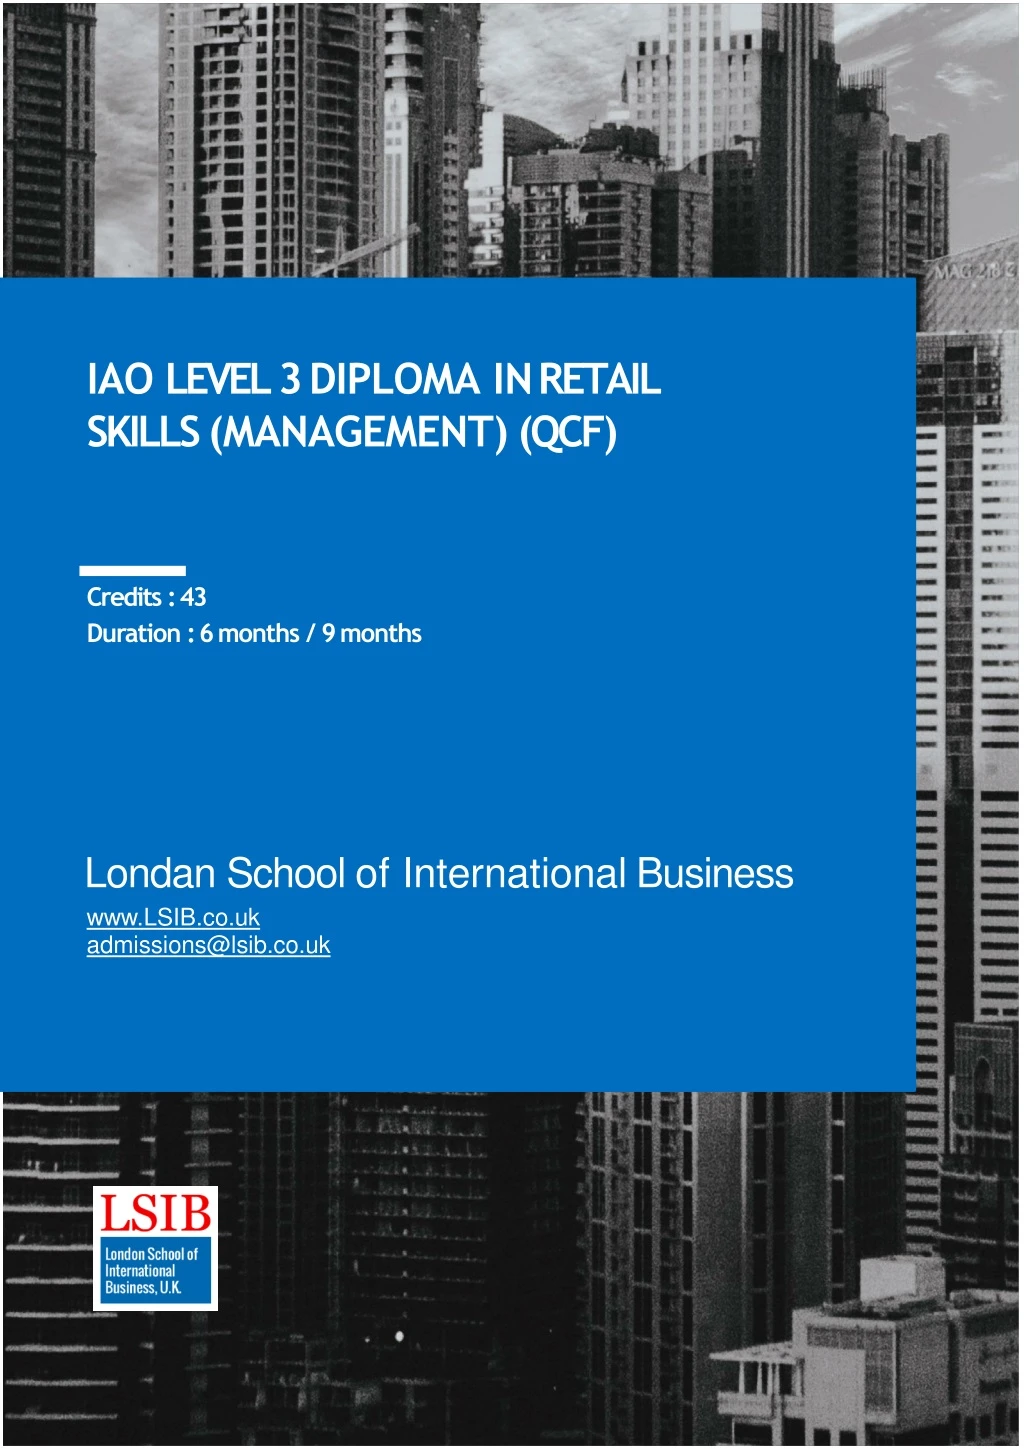 iao level 3 diploma in retail skills management qcf